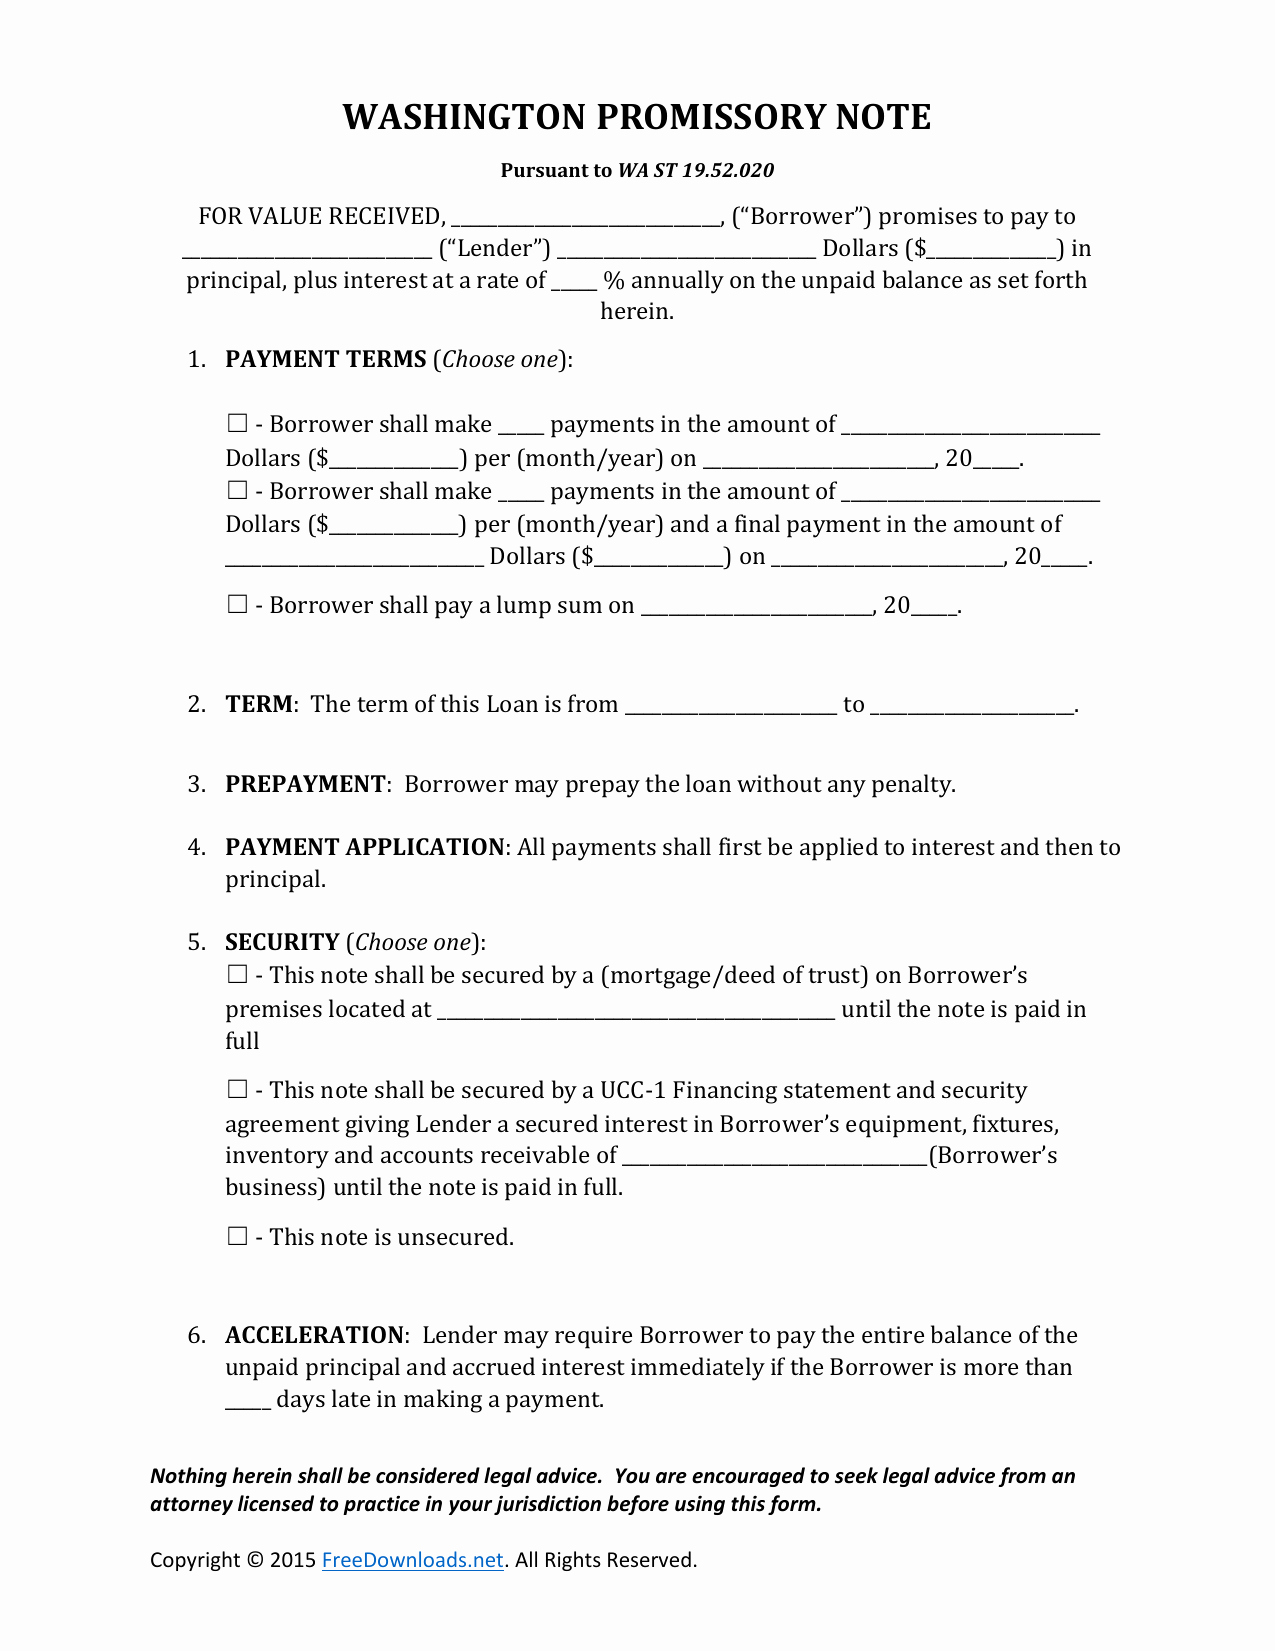 Promissory Note Template Free Download Lovely Download Washington Promissory Note form Pdf